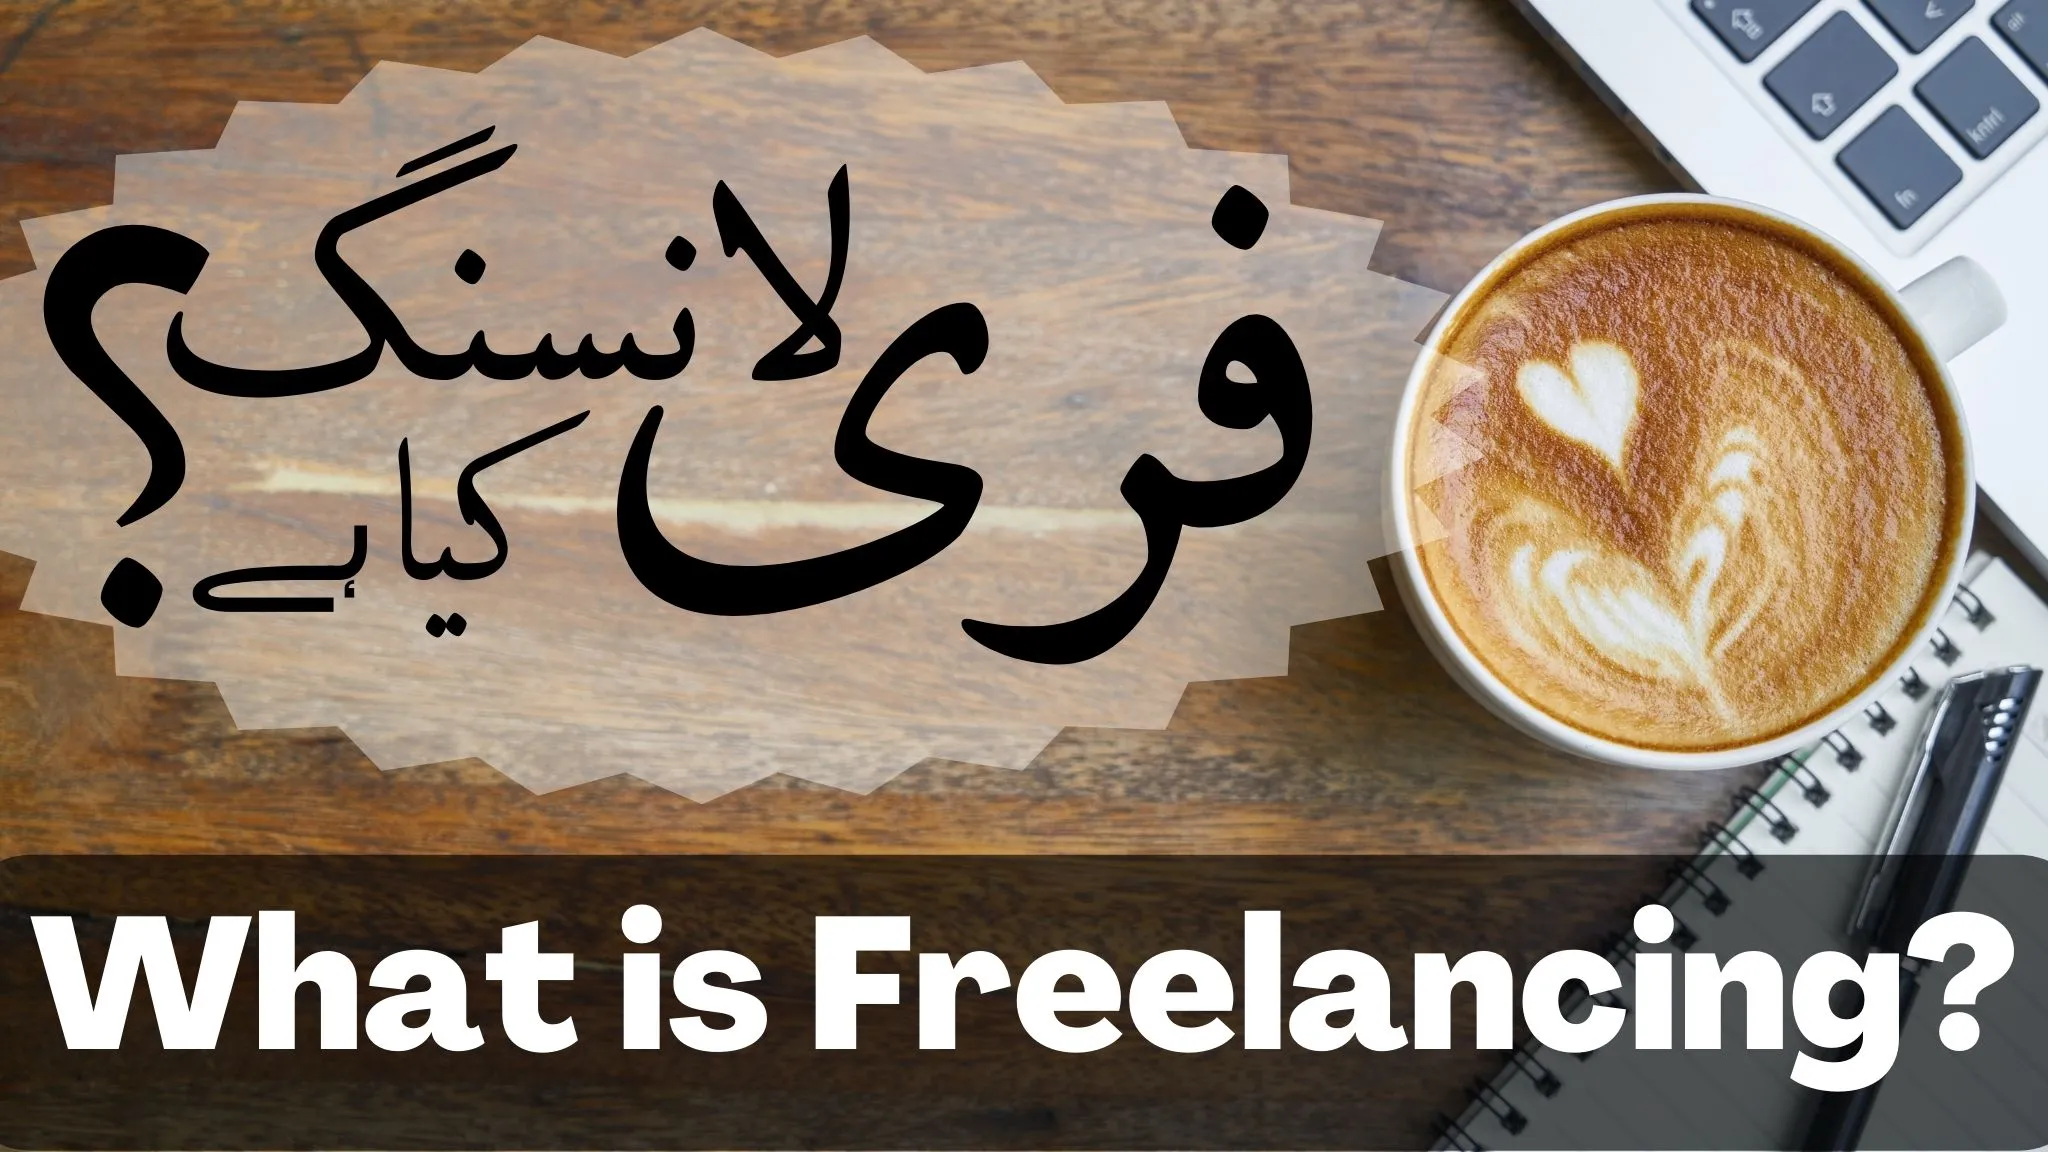 Freelancing-meaning